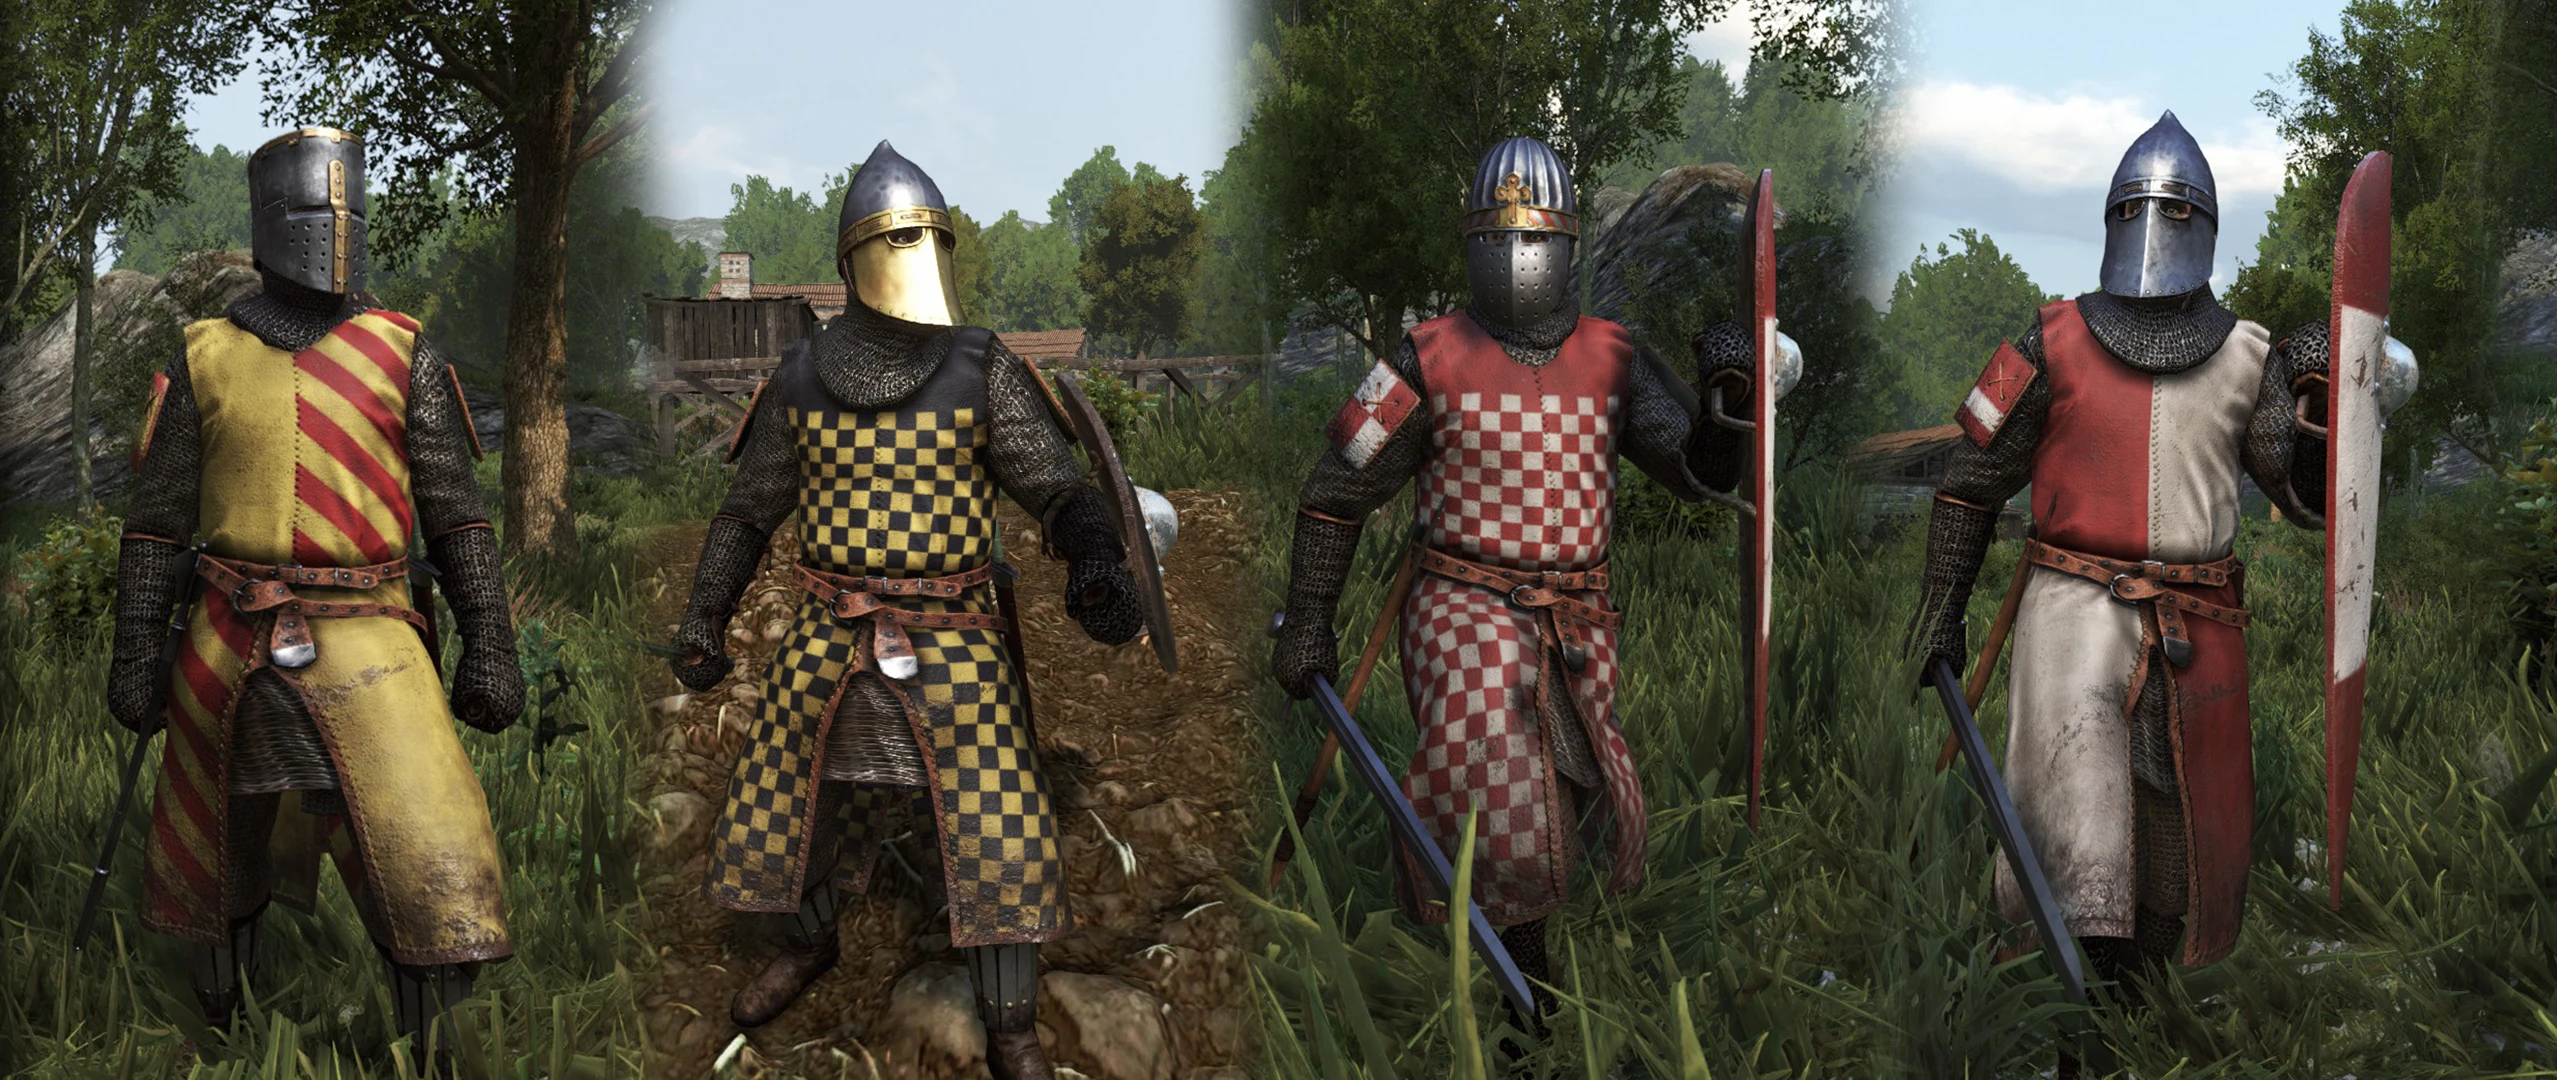 Bannerlord 2 юниты. Баннерлорд 1. Mount and Blade 2 Bannerlord броня. Mount & Blade II: Bannerlord (2022) PC. Mount and Blade 2 Bannerlord моды Swadian Armoury.